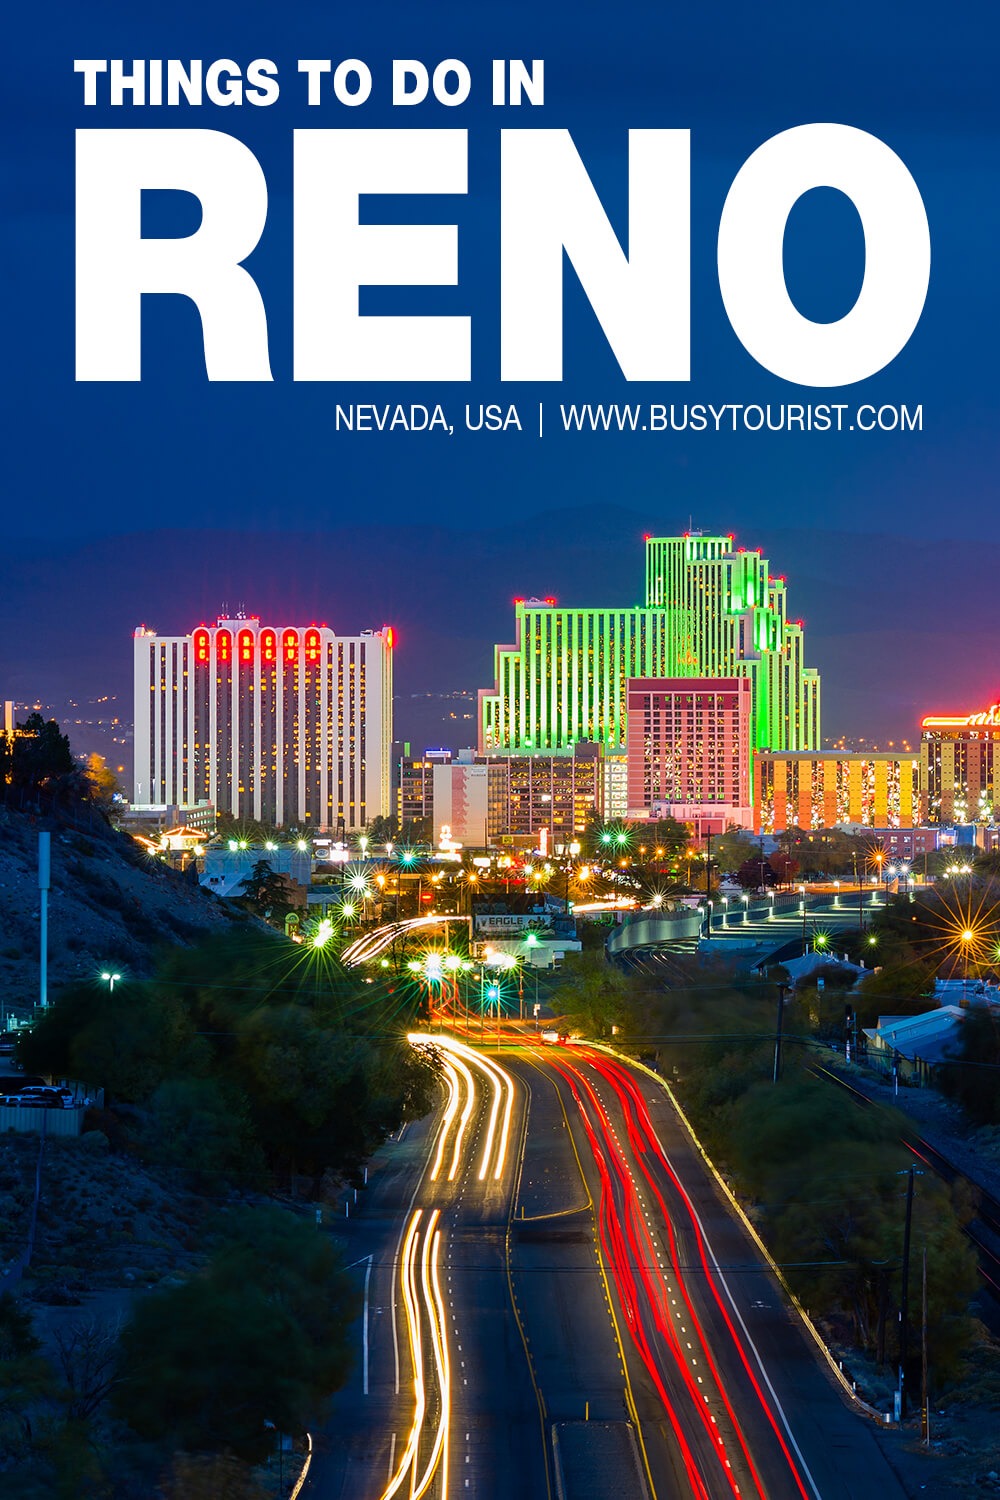 30 Best & Fun Things To Do In Reno (Nevada) Busy Tourist